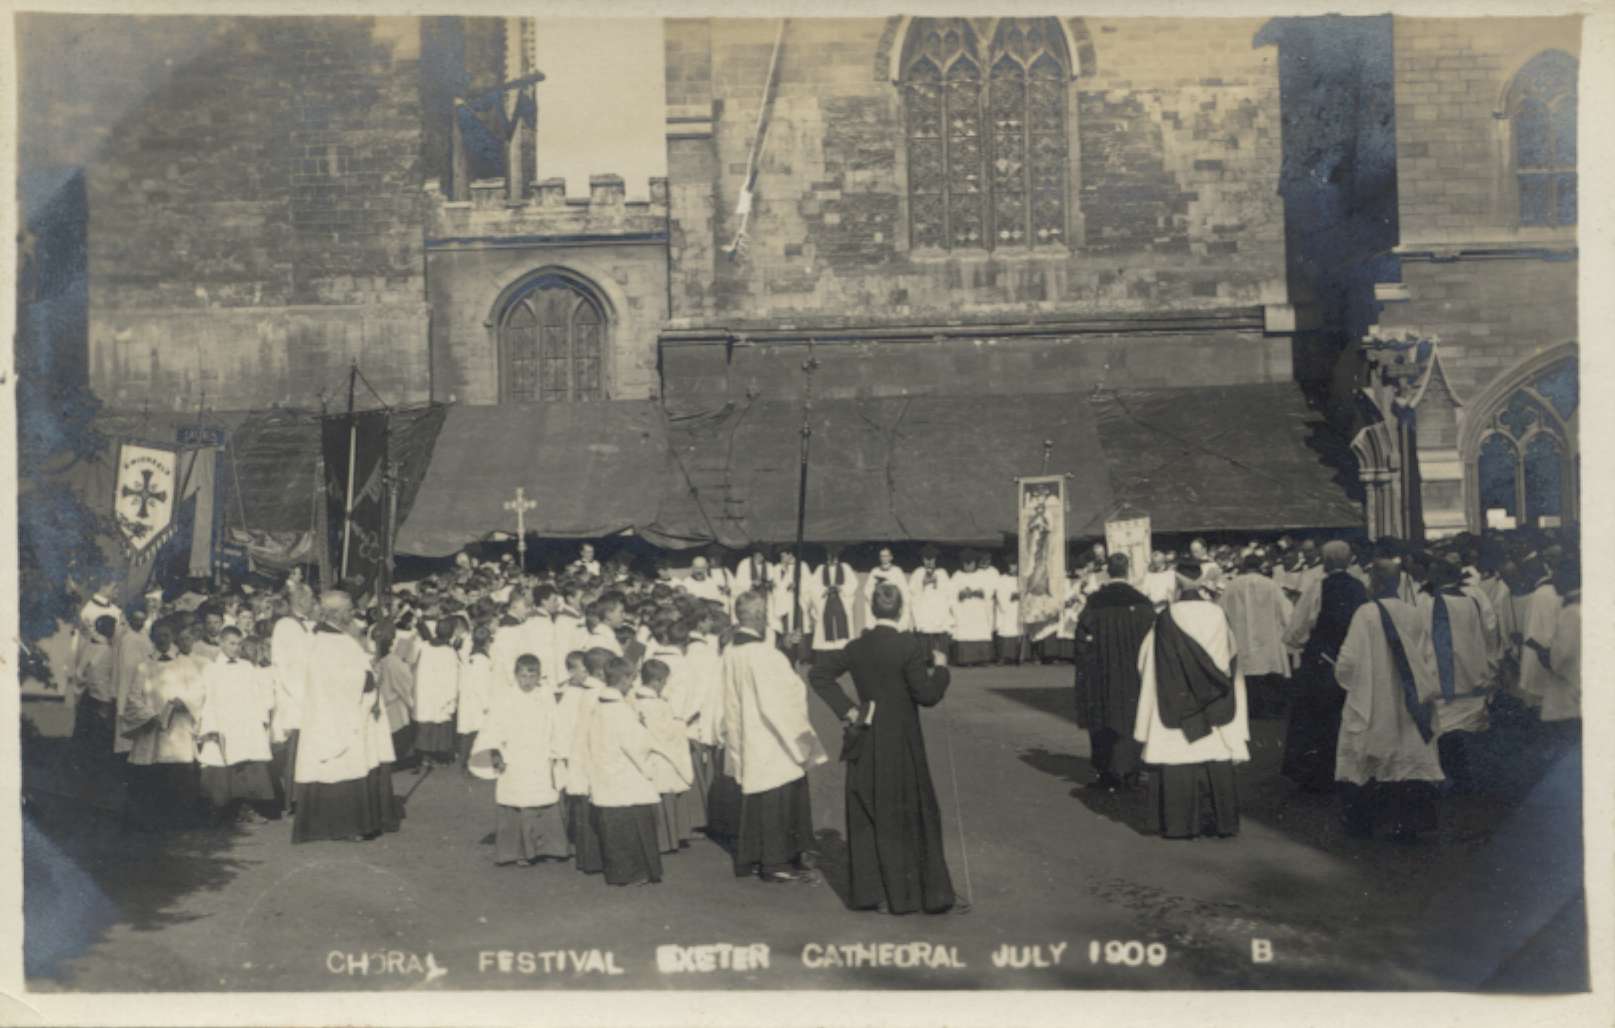 Exeter Cathedral Choral Fesstival 1909